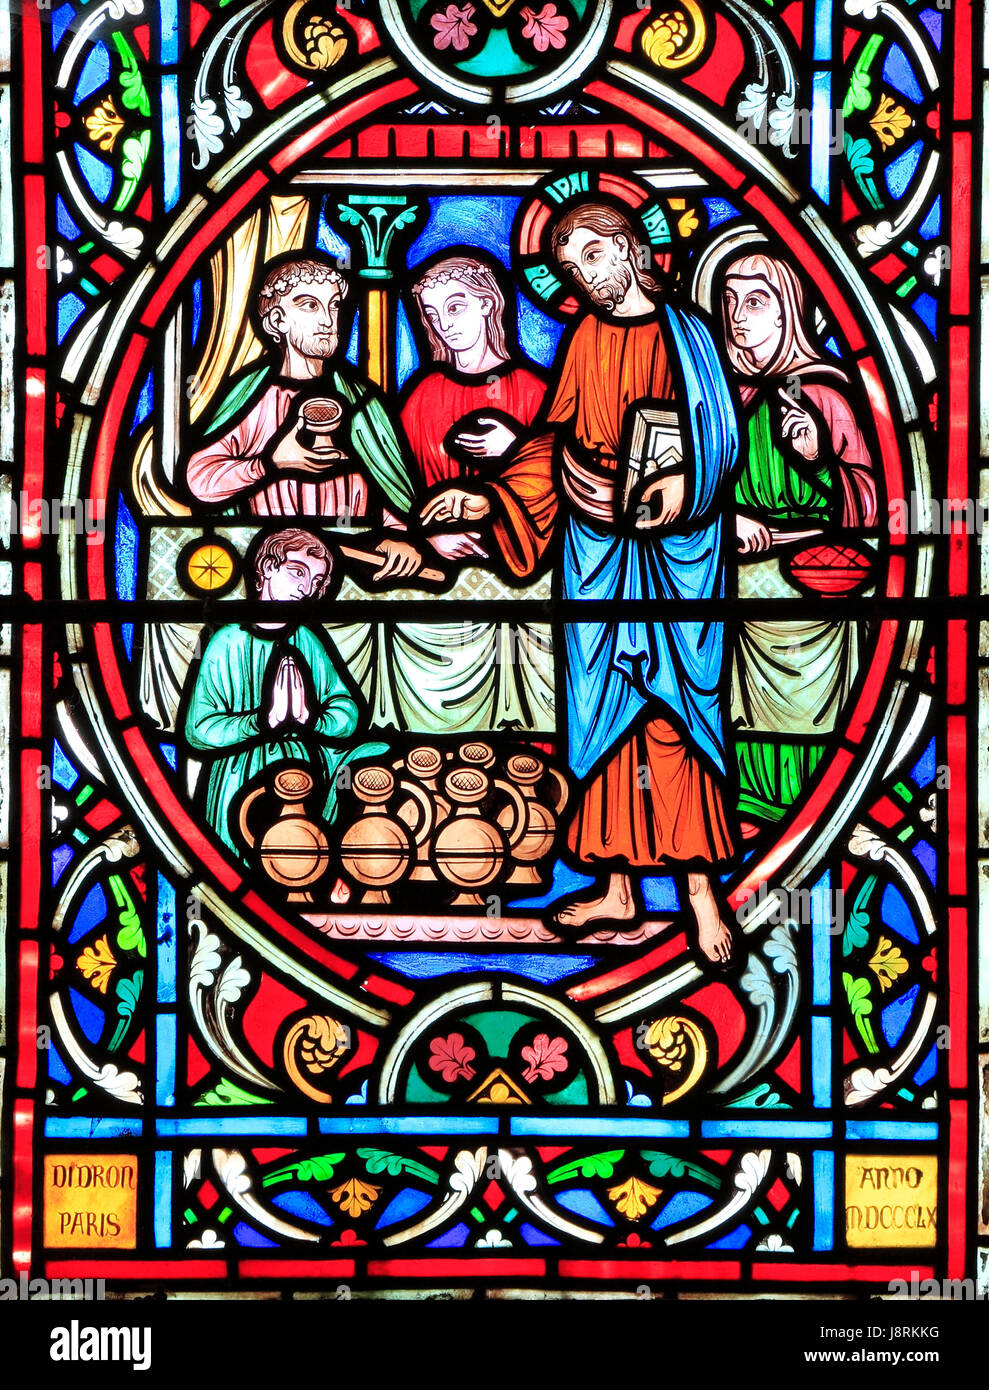 Scene from Life of Jesus, by Adolph Didron, Paris, 1860, stained glass window, Feltwell, Norfolk. Jesus at Cana Wedding Feast, turns water into wine.  Stock Photo